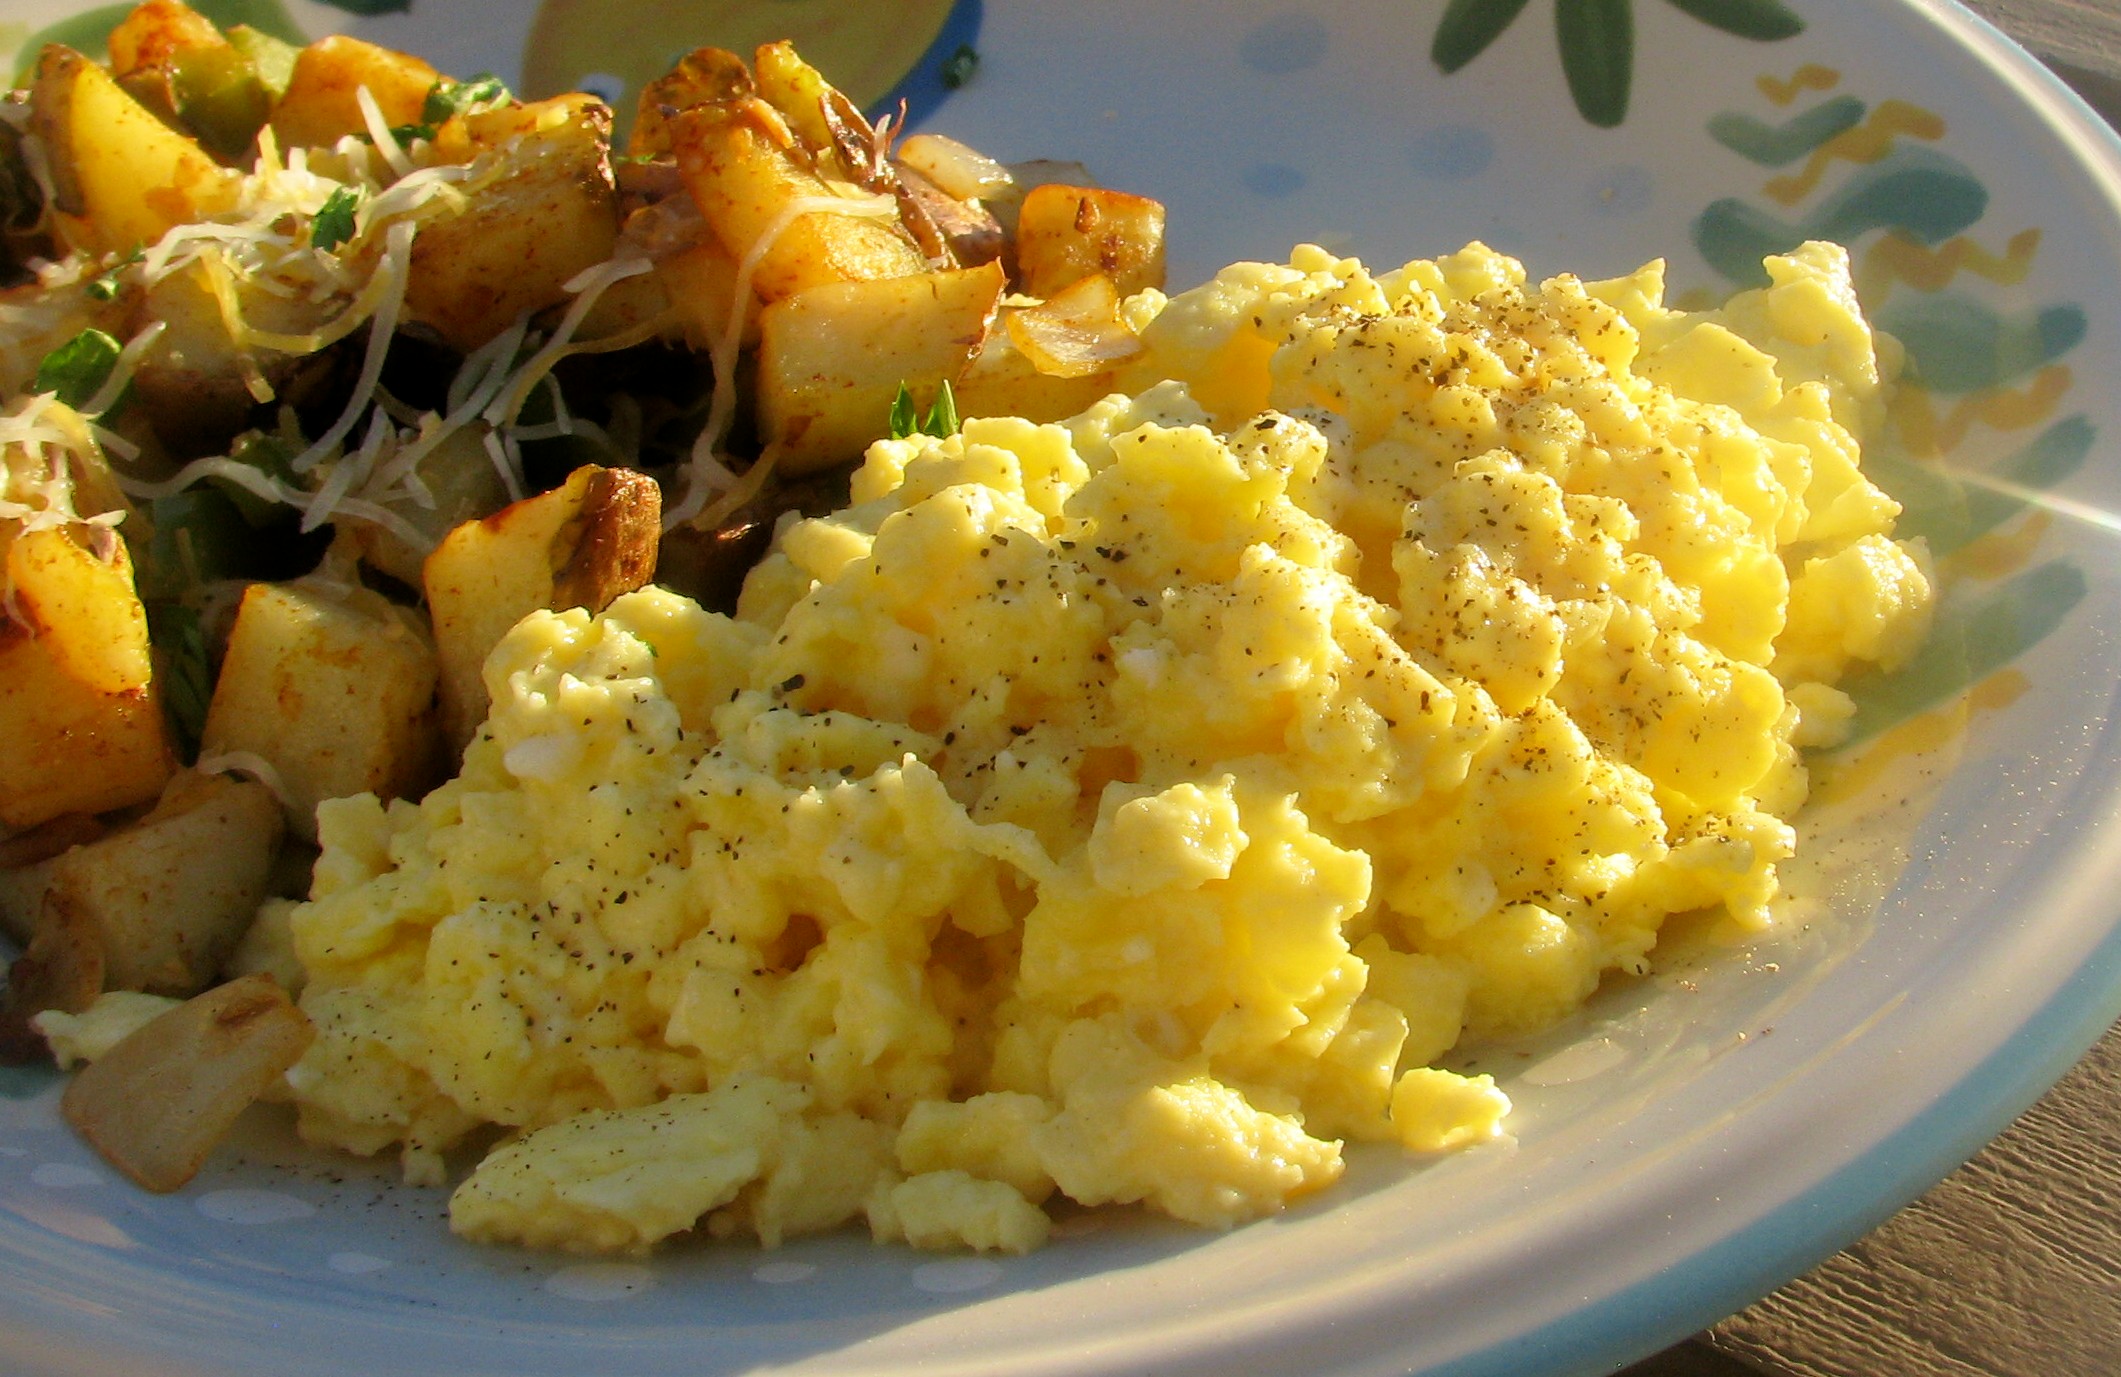 CREAMY SCRAMBLED EGGS IN THE MICROWAVE